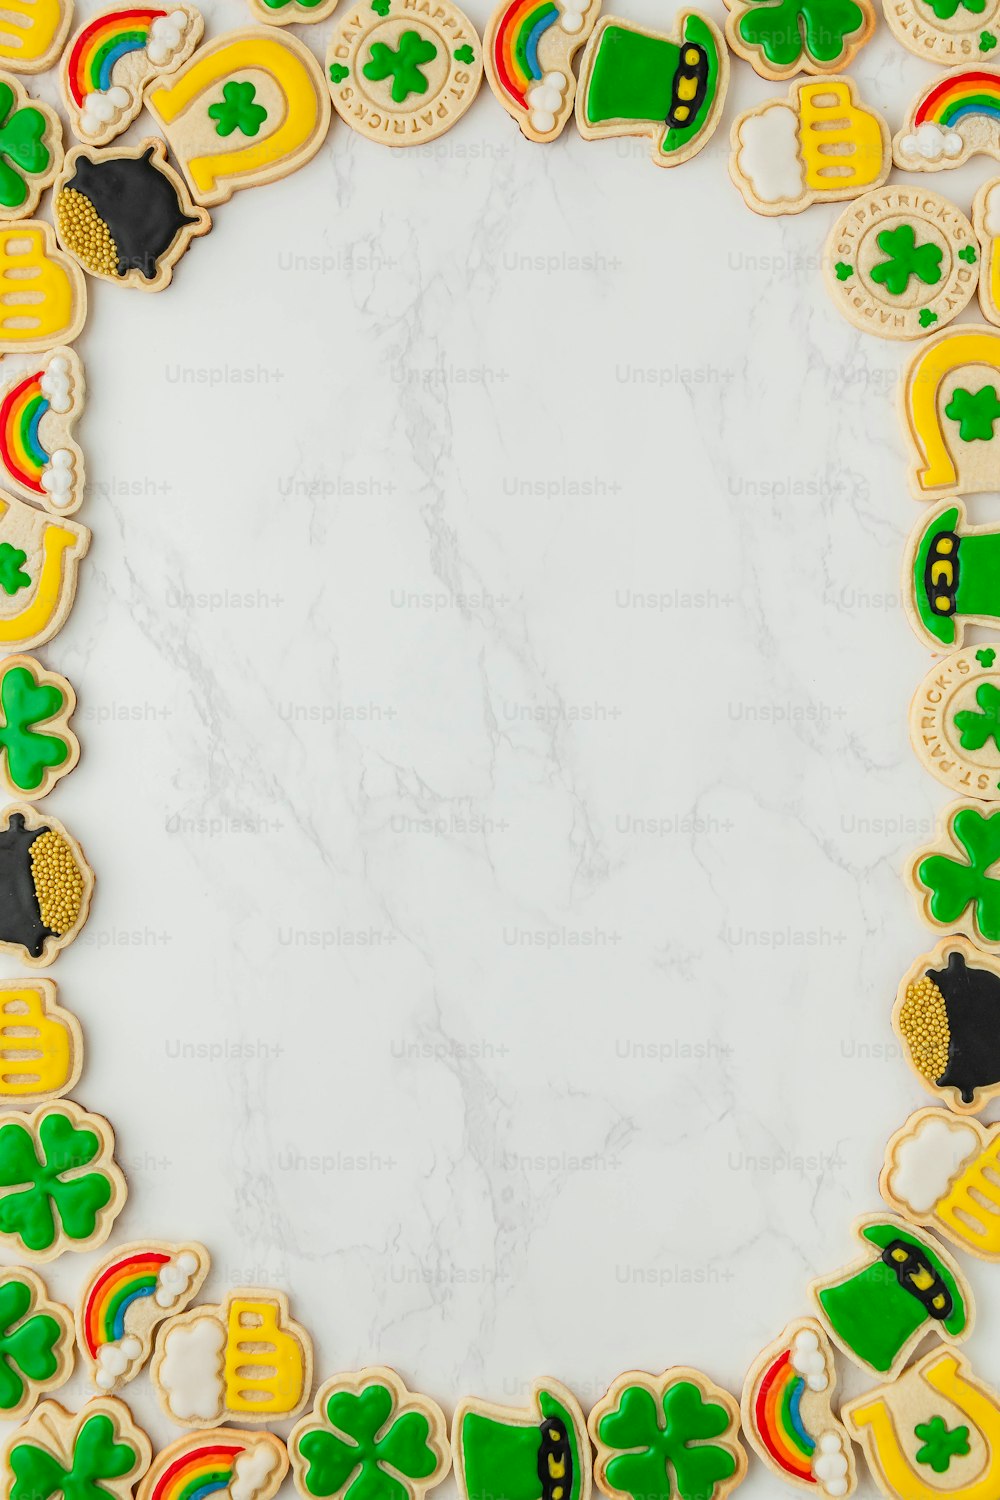 a picture frame made out of cookies with shamrocks and hats